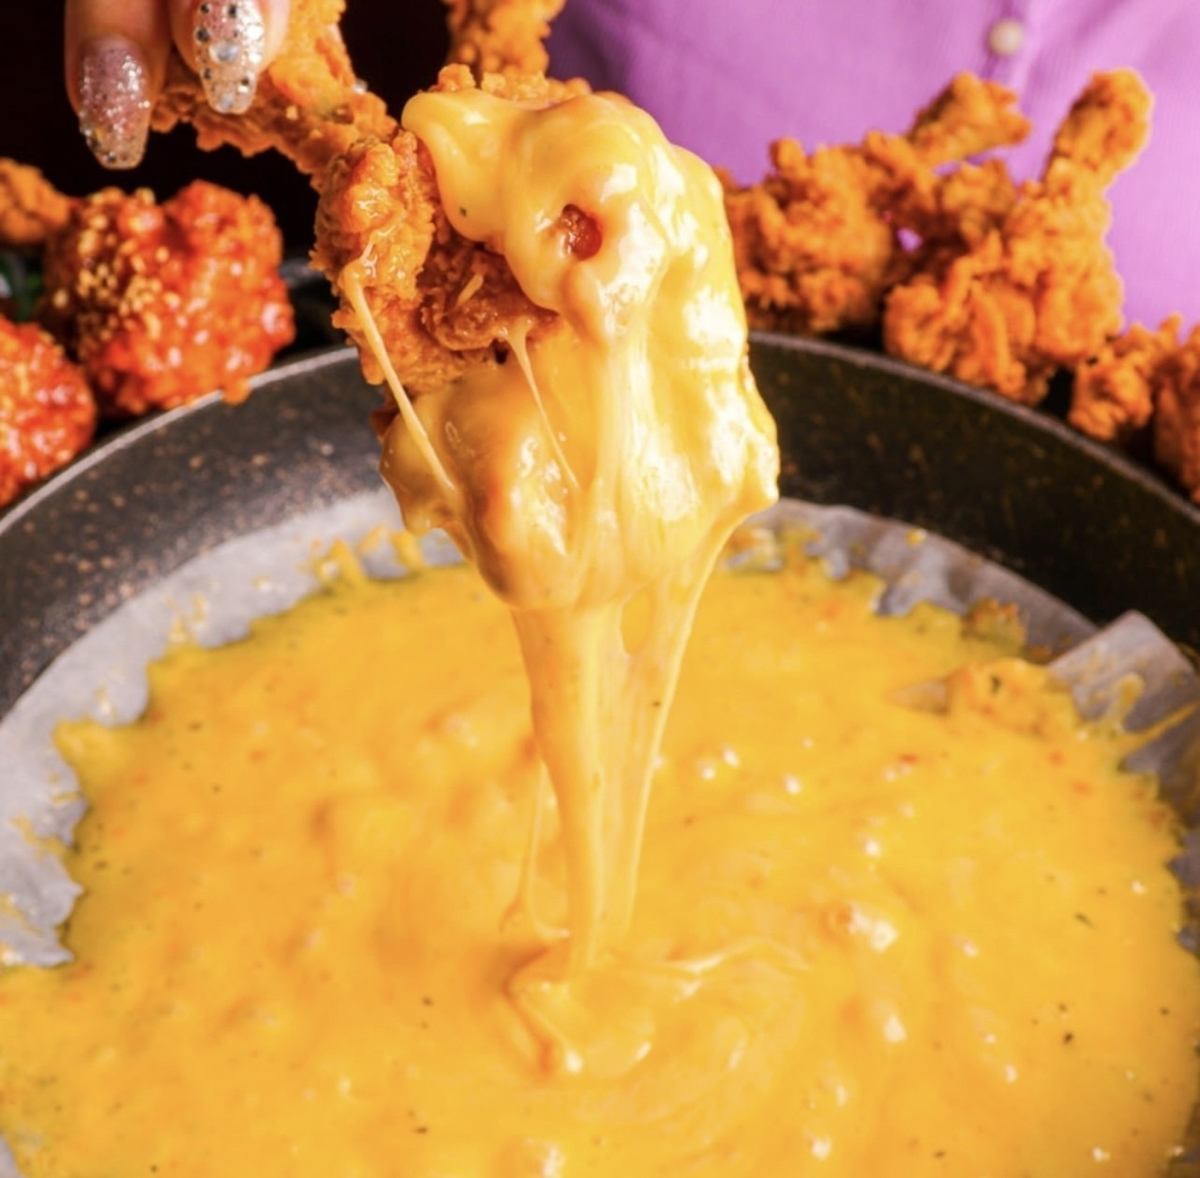 Recommended for customers who like cheese, such as cheese fondue chicken!